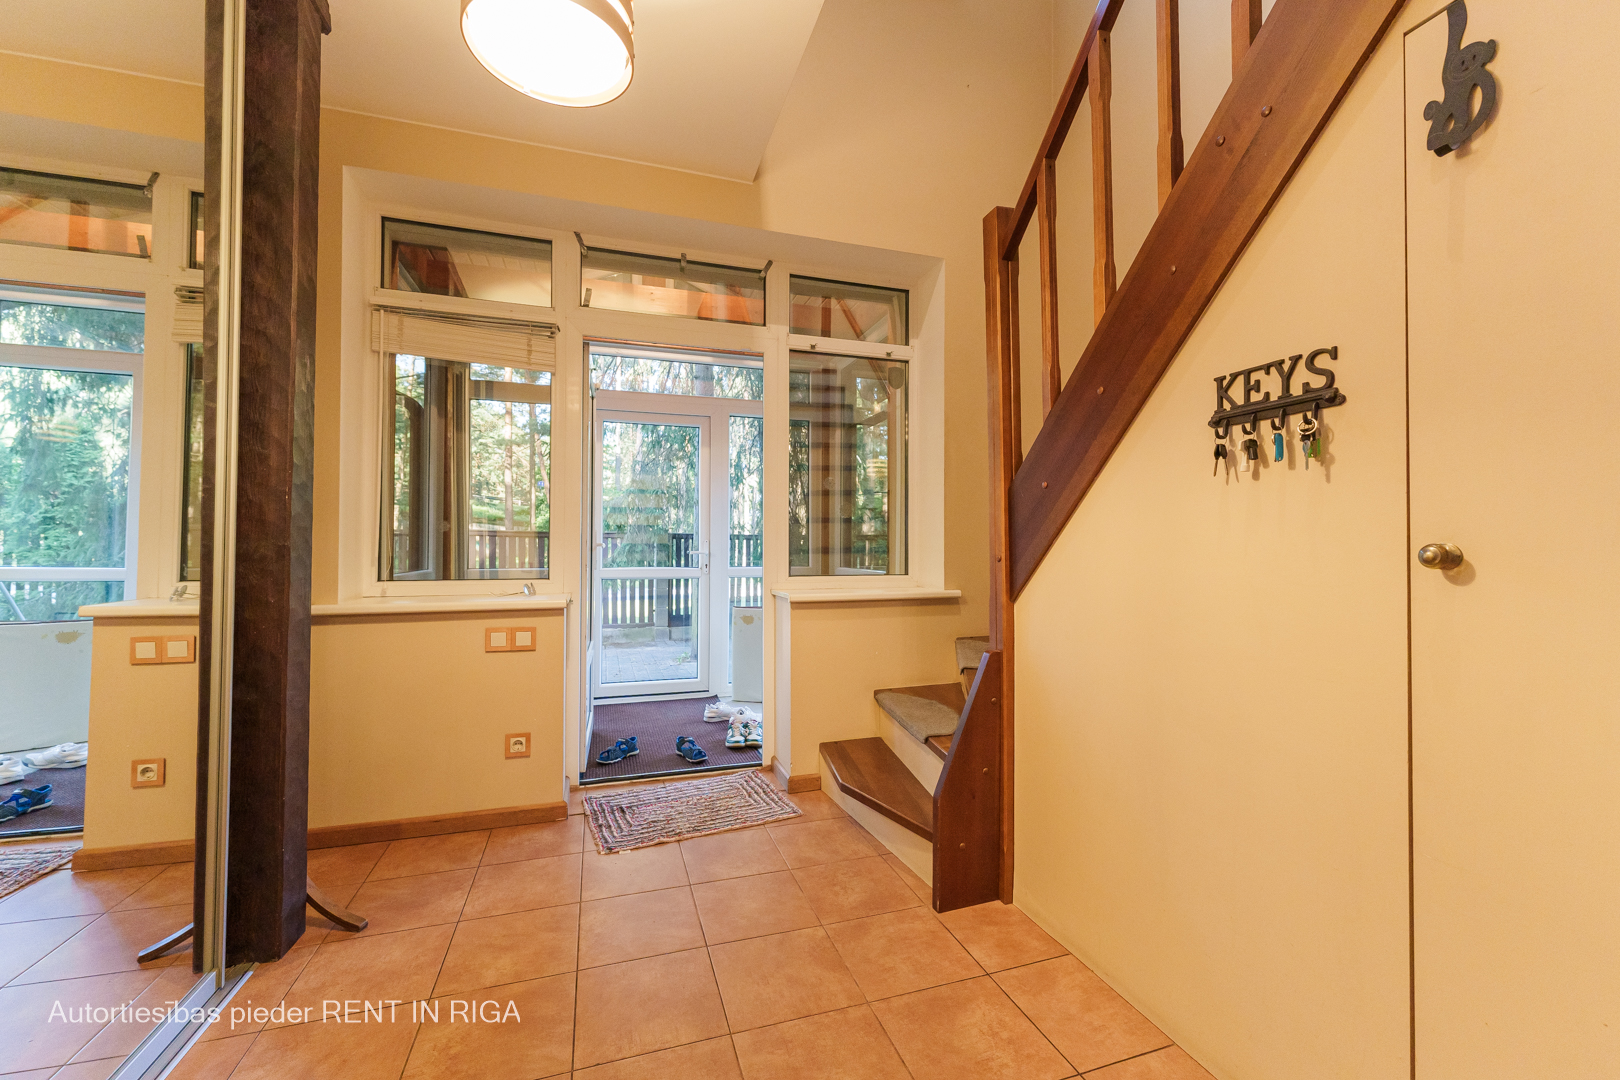 House for rent, Miera street - Image 1